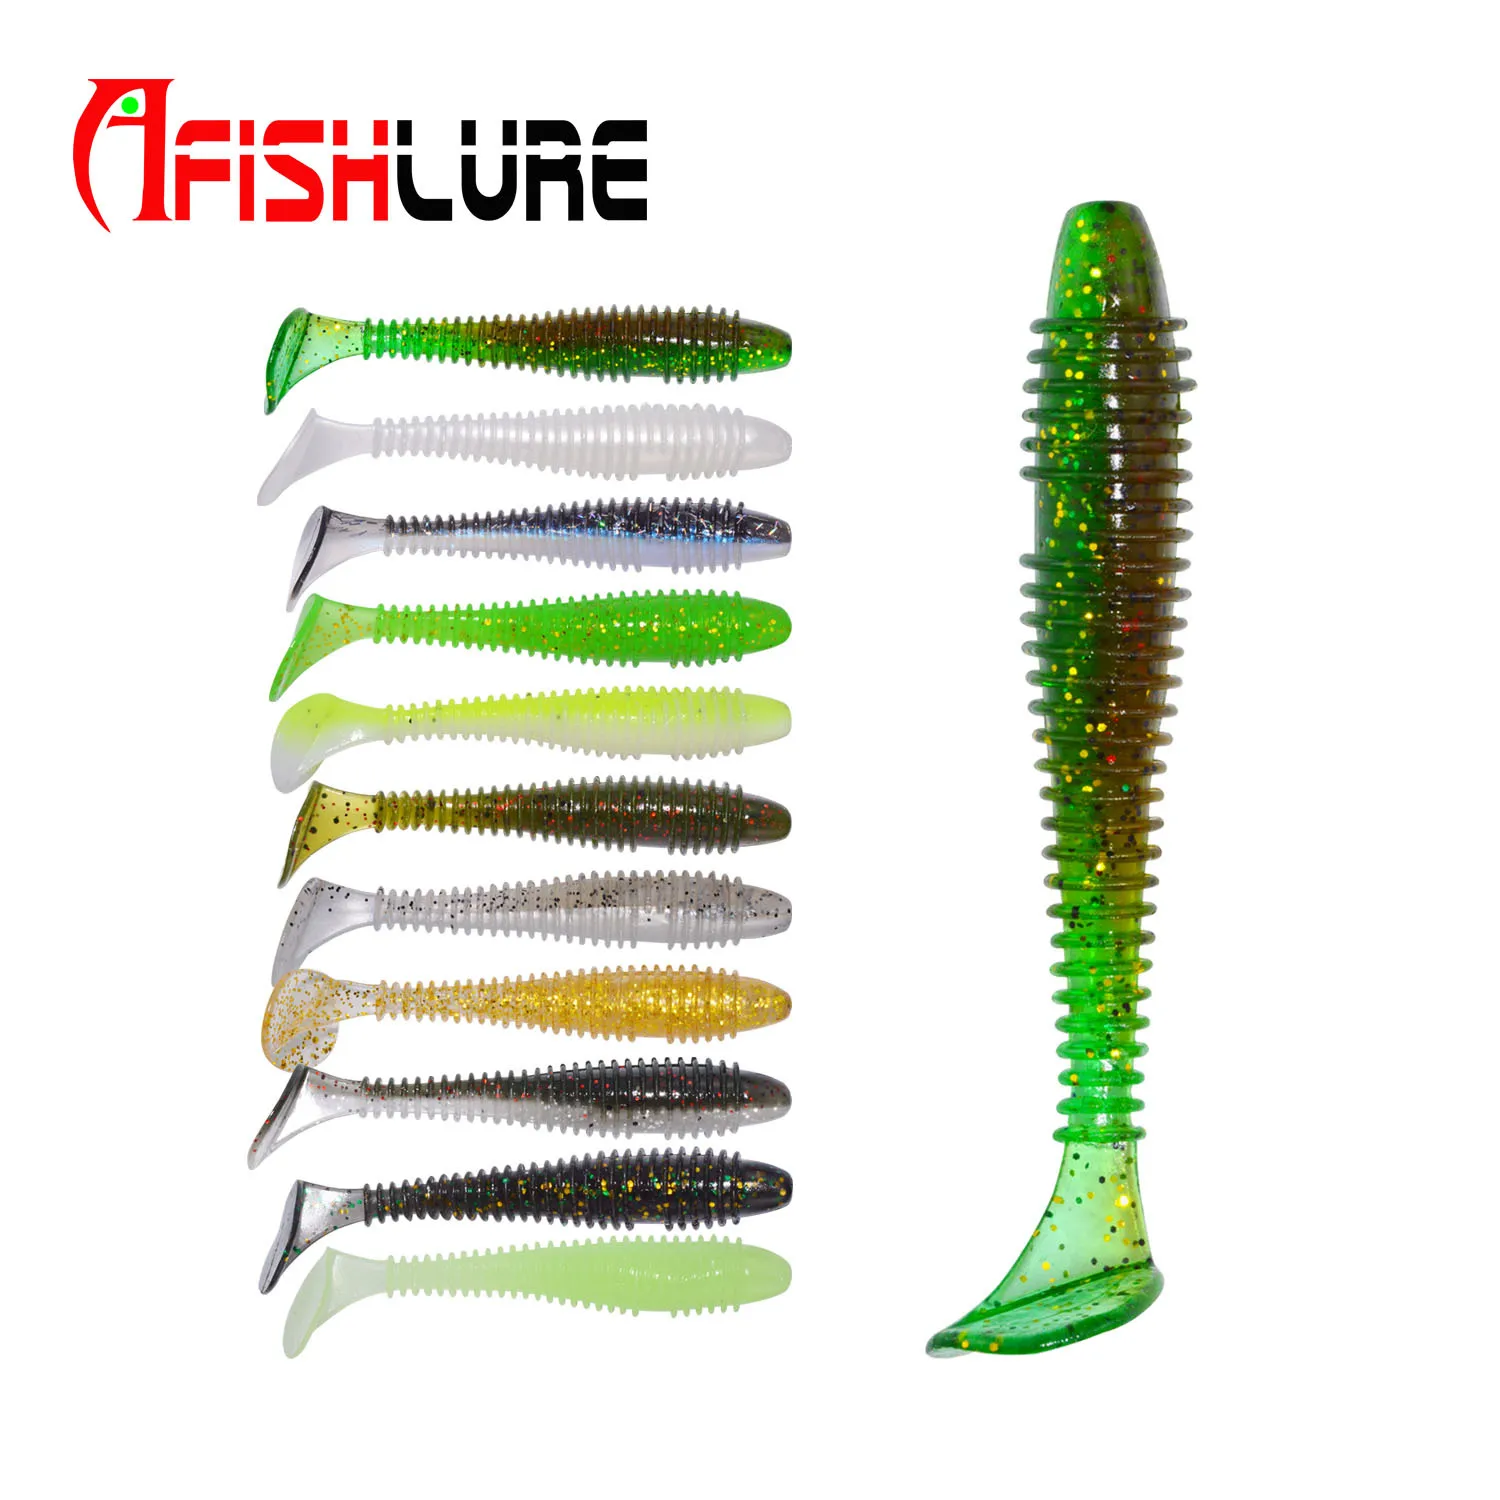 

Afishlure Paddle Tail Soft Plastic Fishing Lures Grubs Worm Lures Bait 55mm/1.45g Texas Rig Crappie Lures